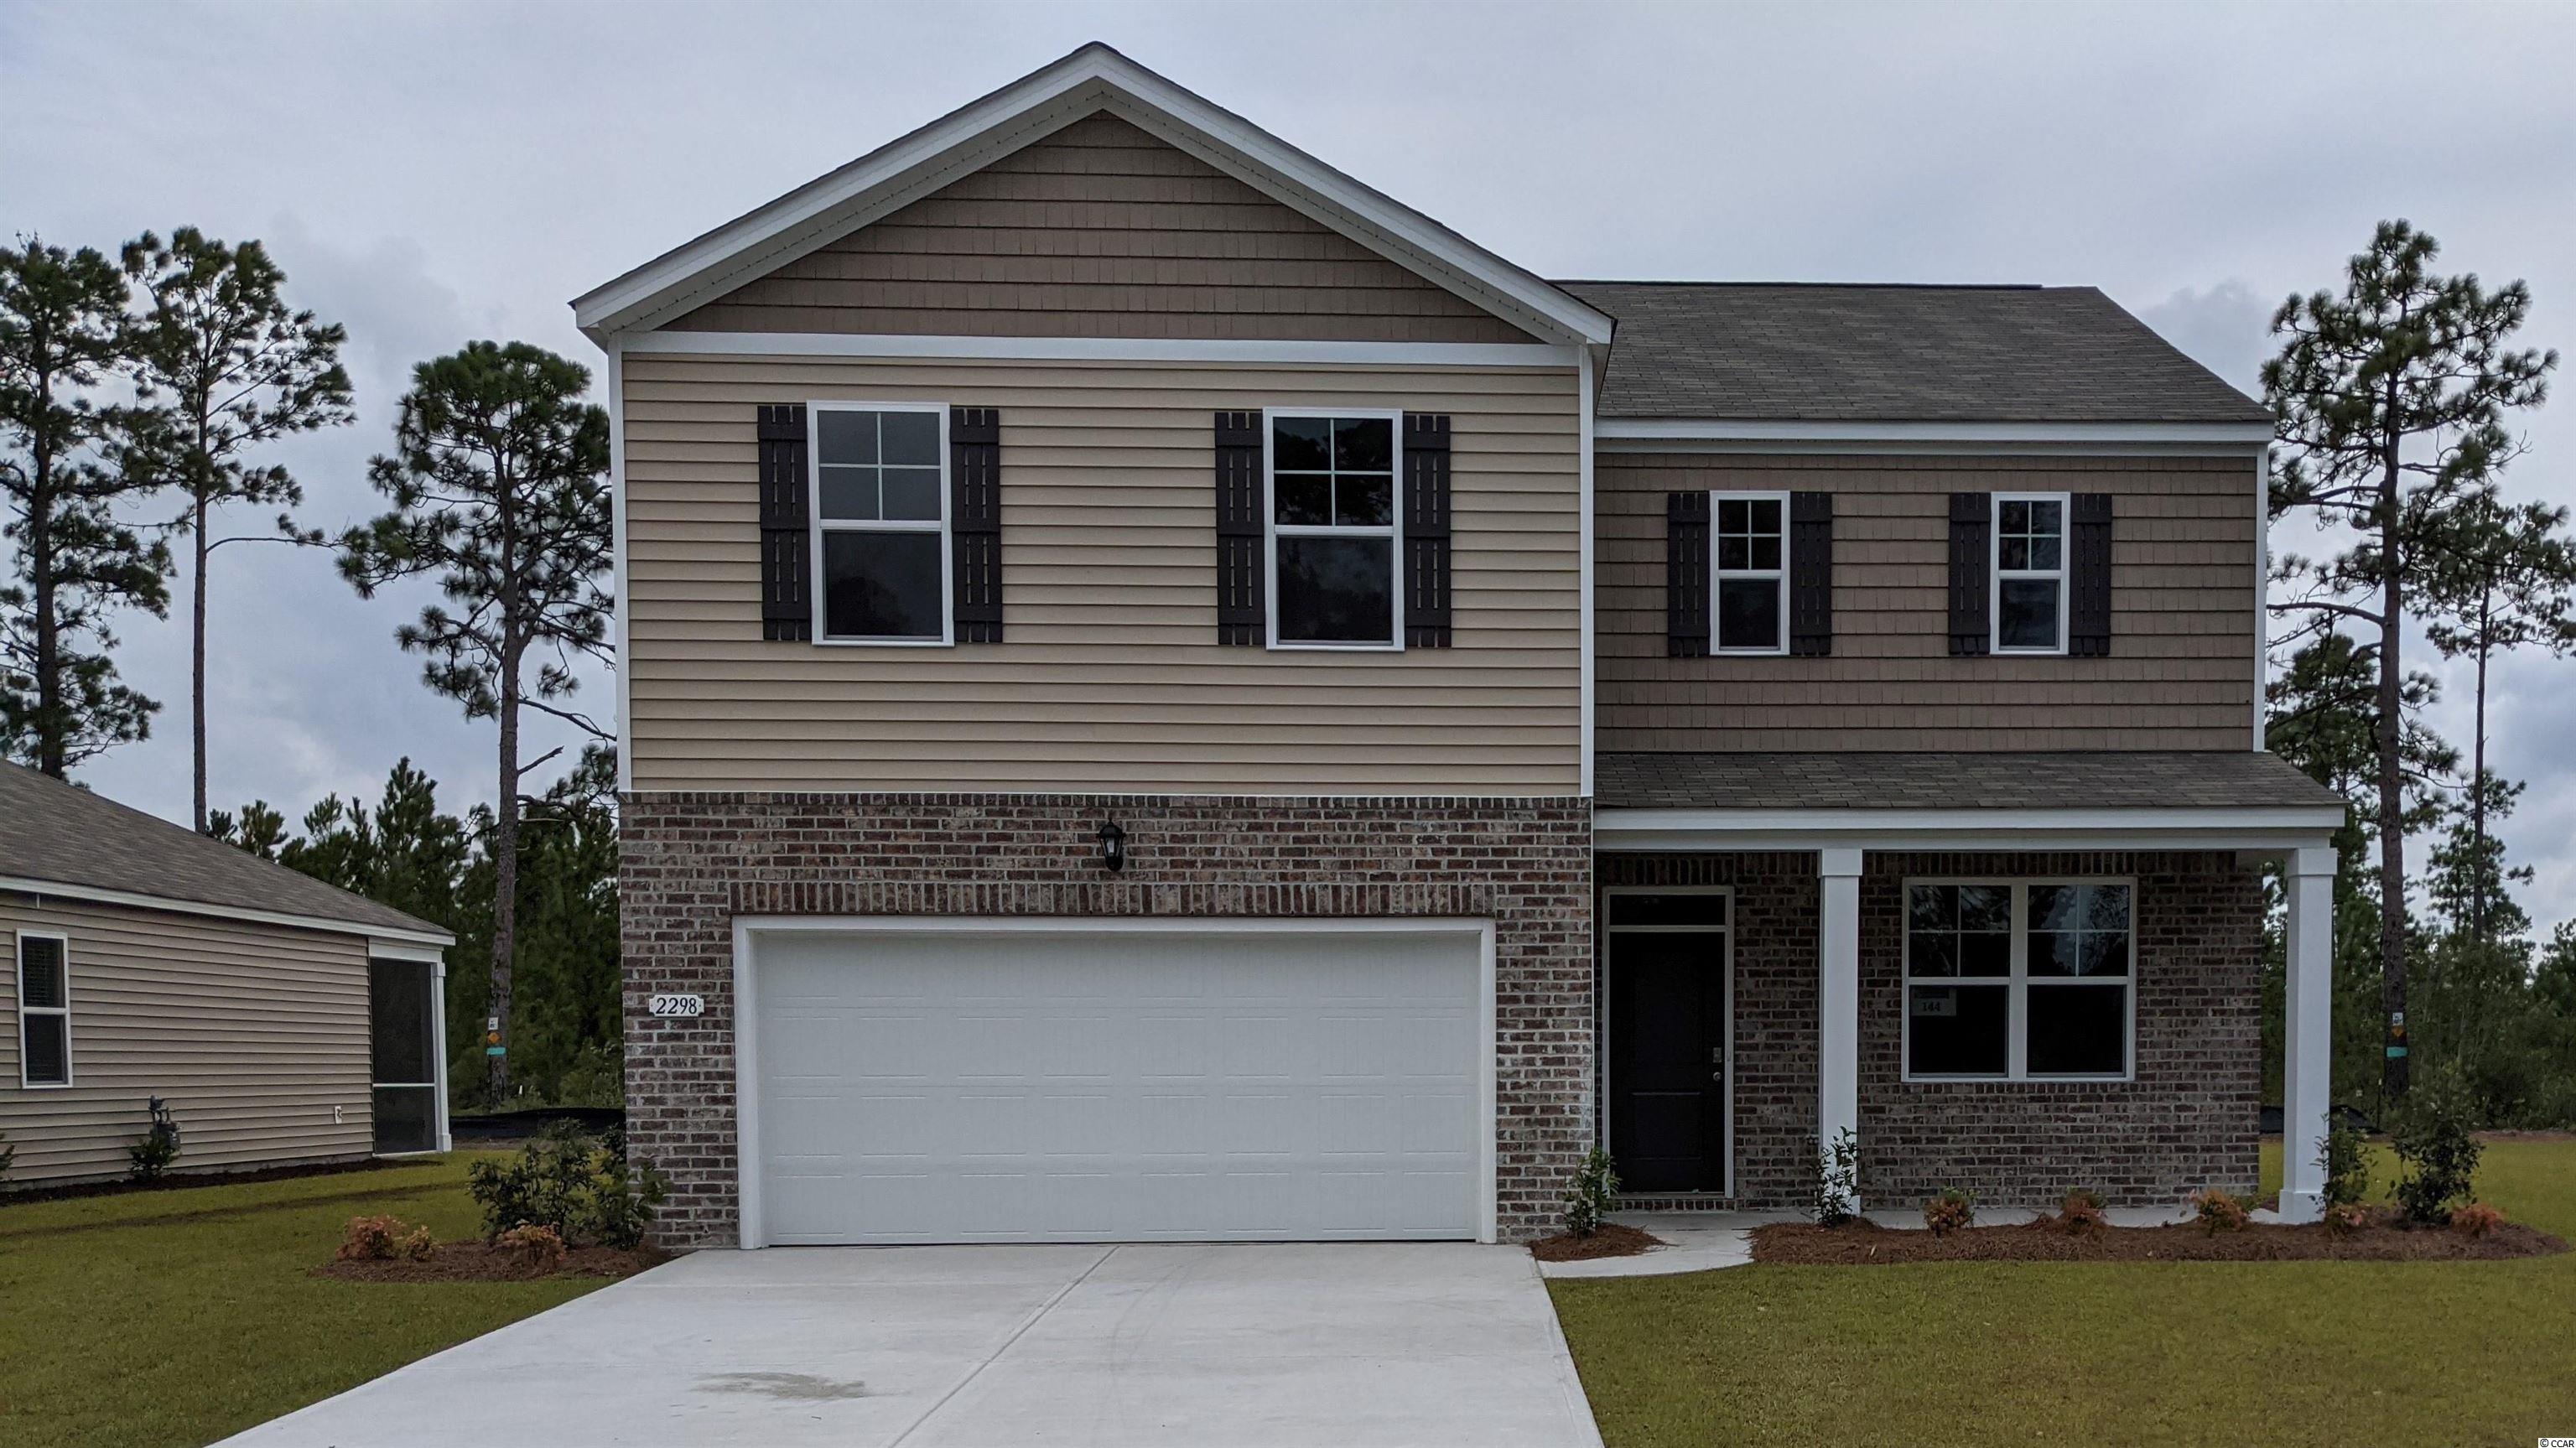 2298 Blackthorn Dr. Conway, SC 29526